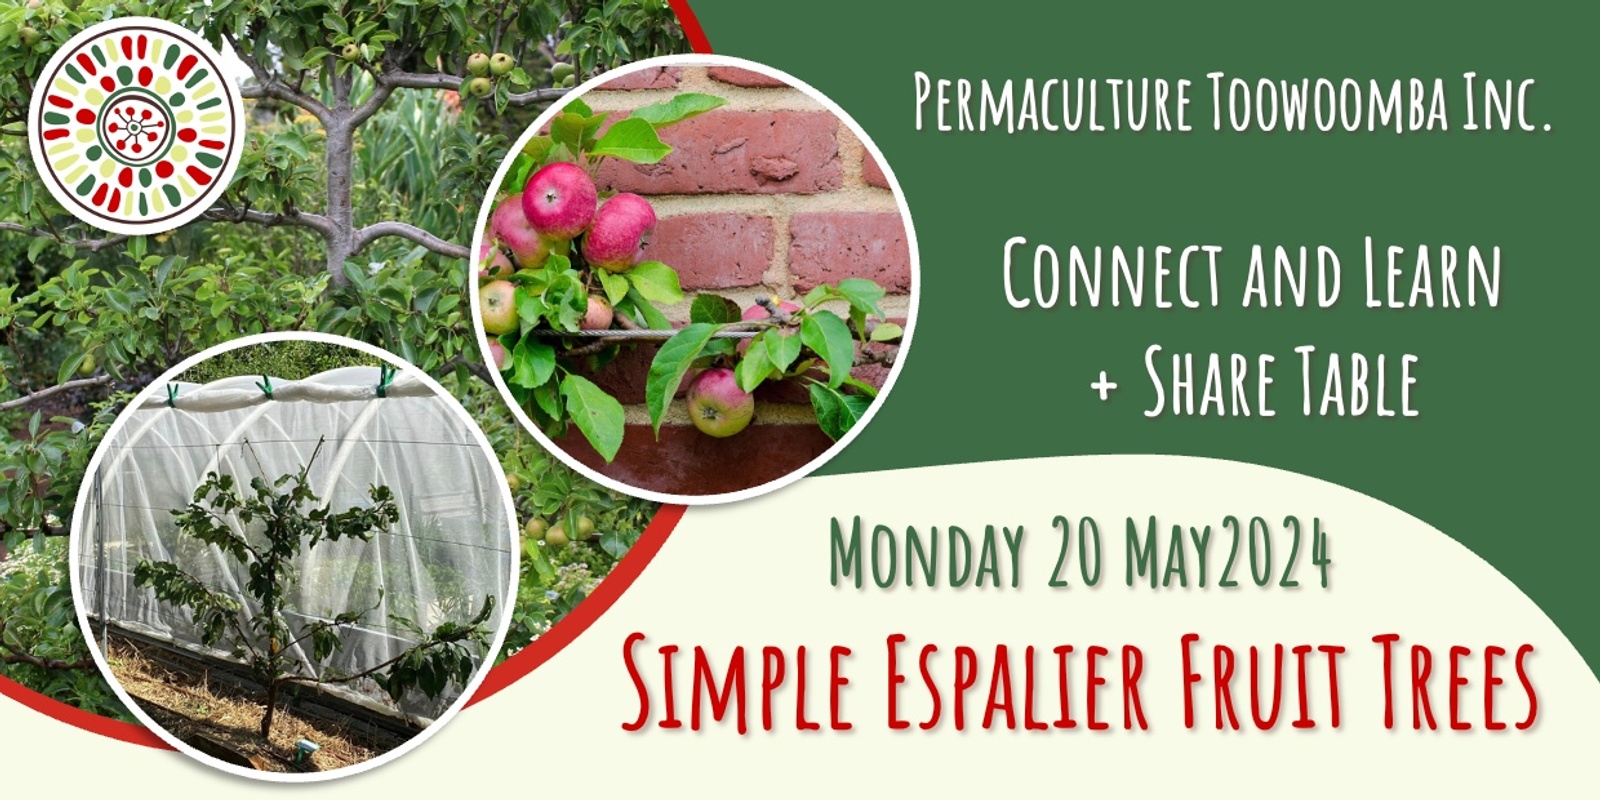 Banner image for Connect and Learn - Simple Espalier Fruit Trees